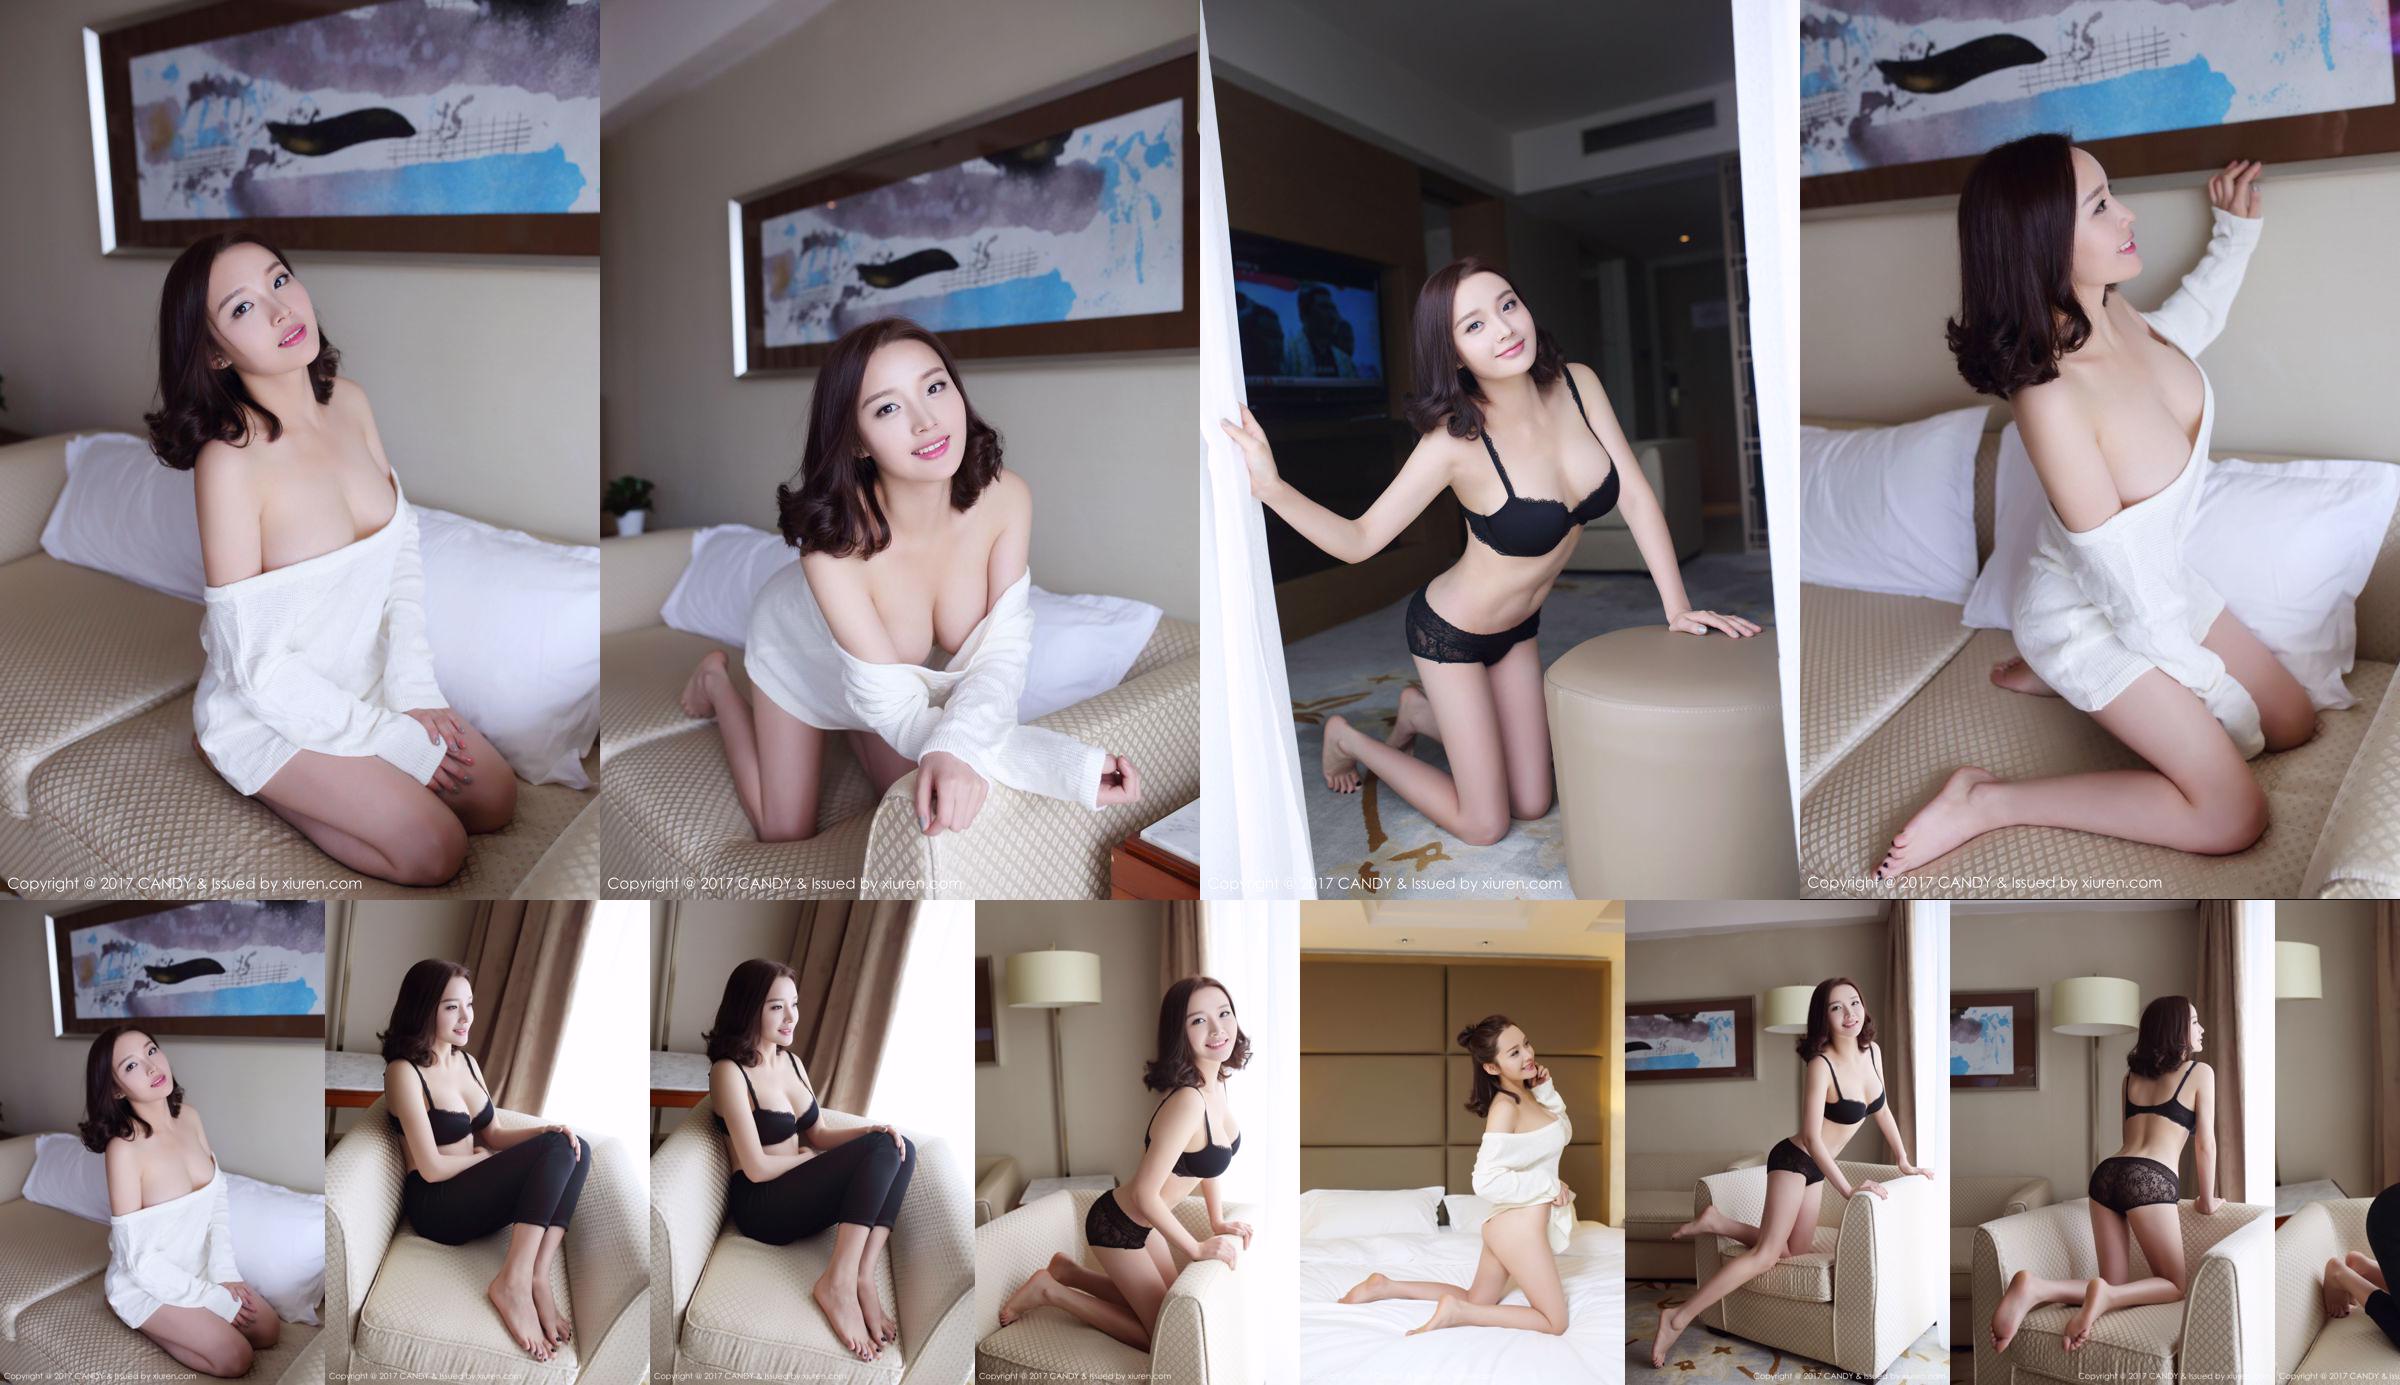 Wang Shiqi "The Beautiful Girl Next Door" [Candy Pictorial CANDY] Vol.033 No.dbbbc4 Page 18